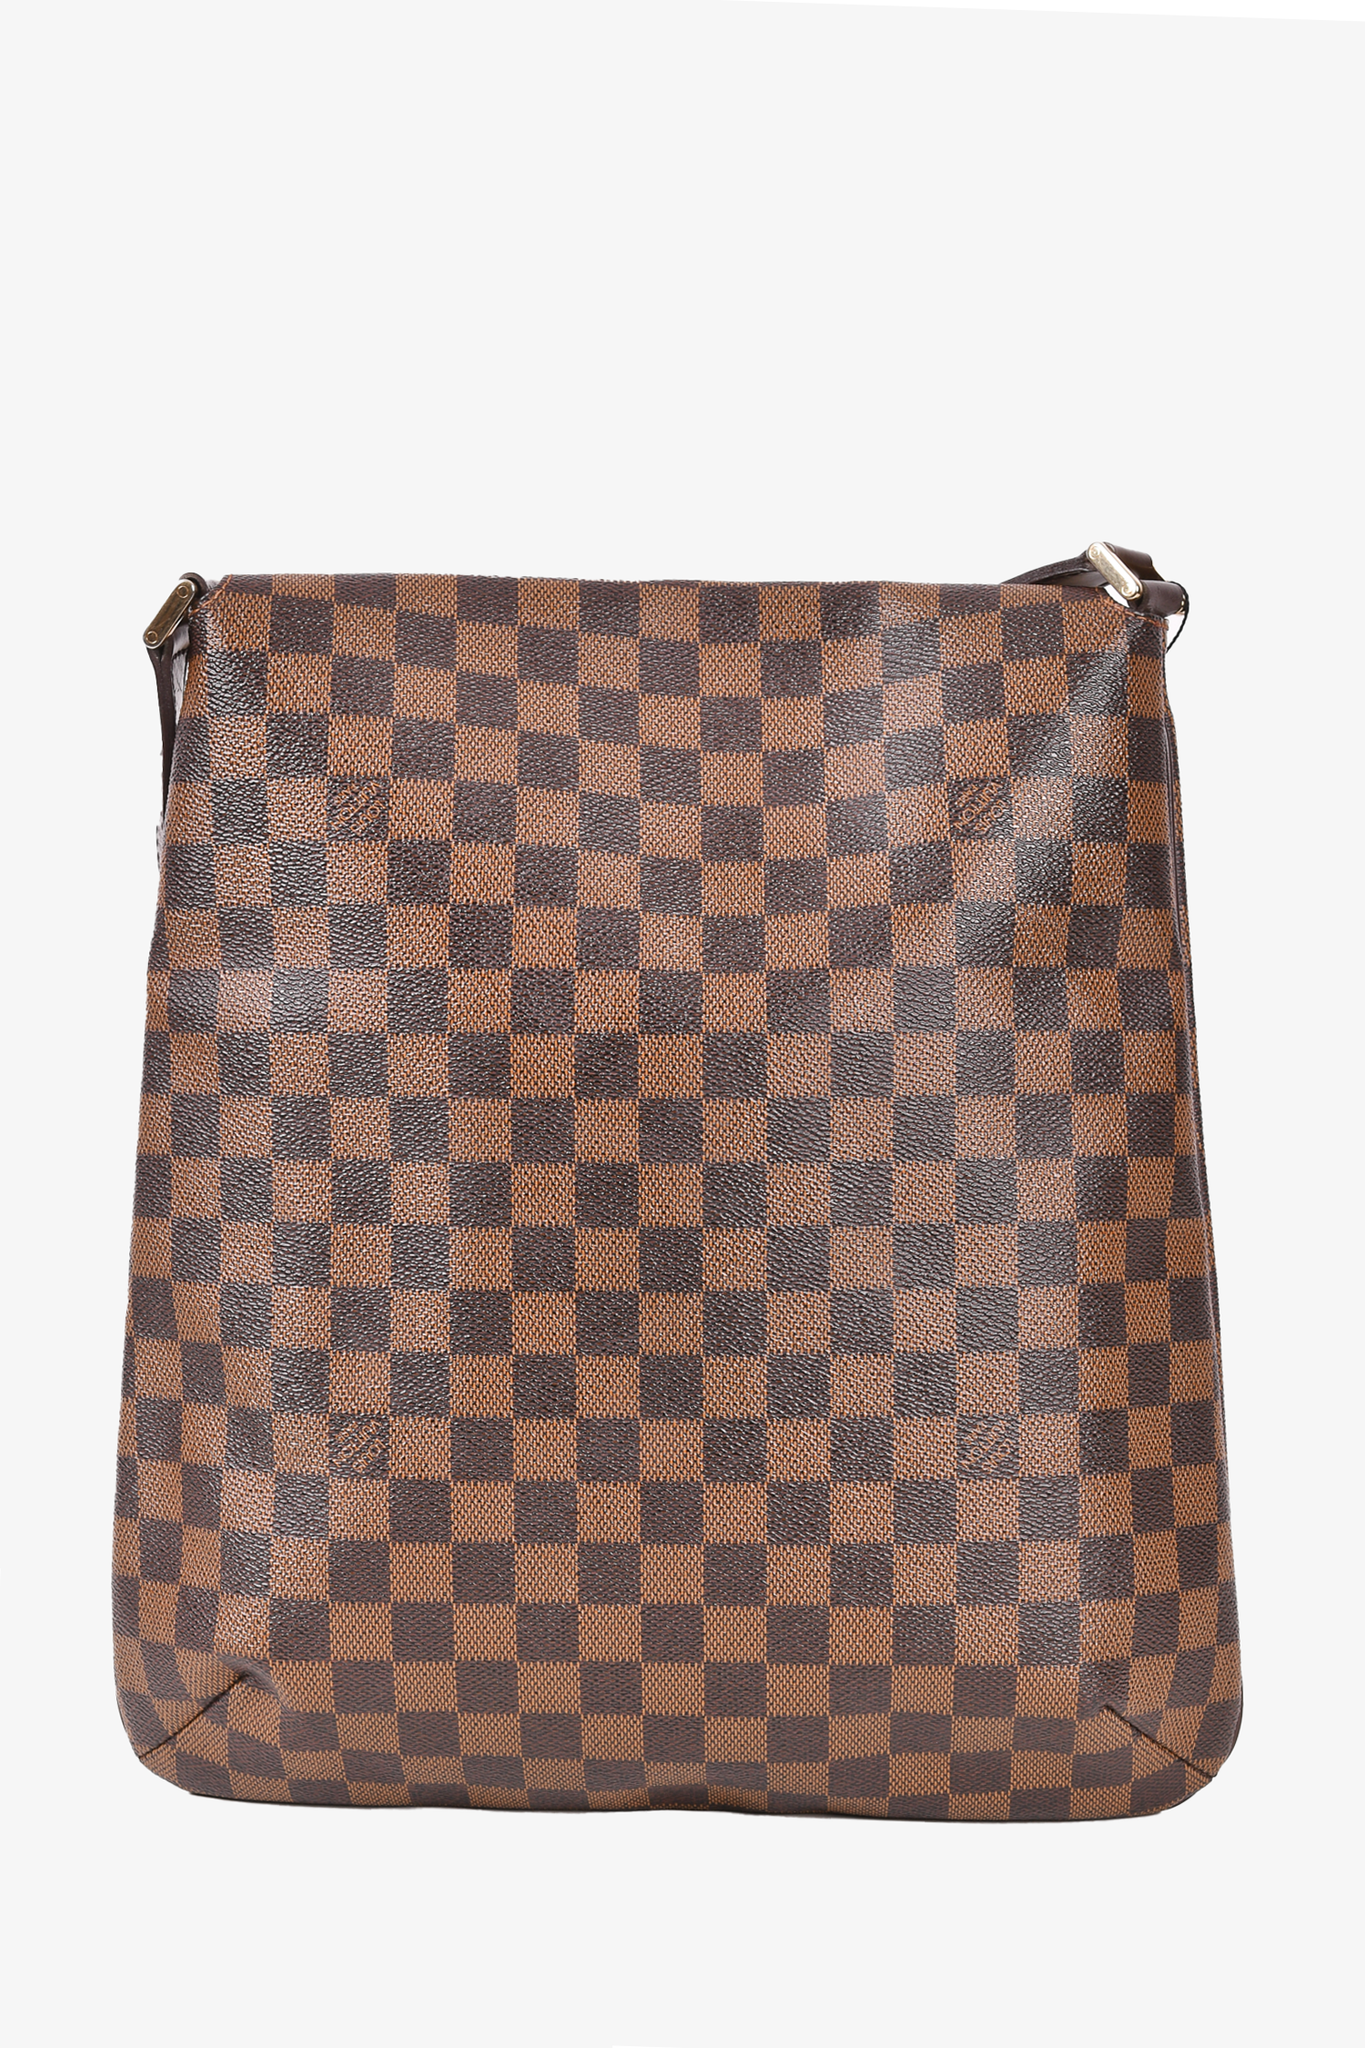 Louis Vuitton Totally MM monogram canvas shoulder bag - clothing &  accessories - by owner - apparel sale - craigslist